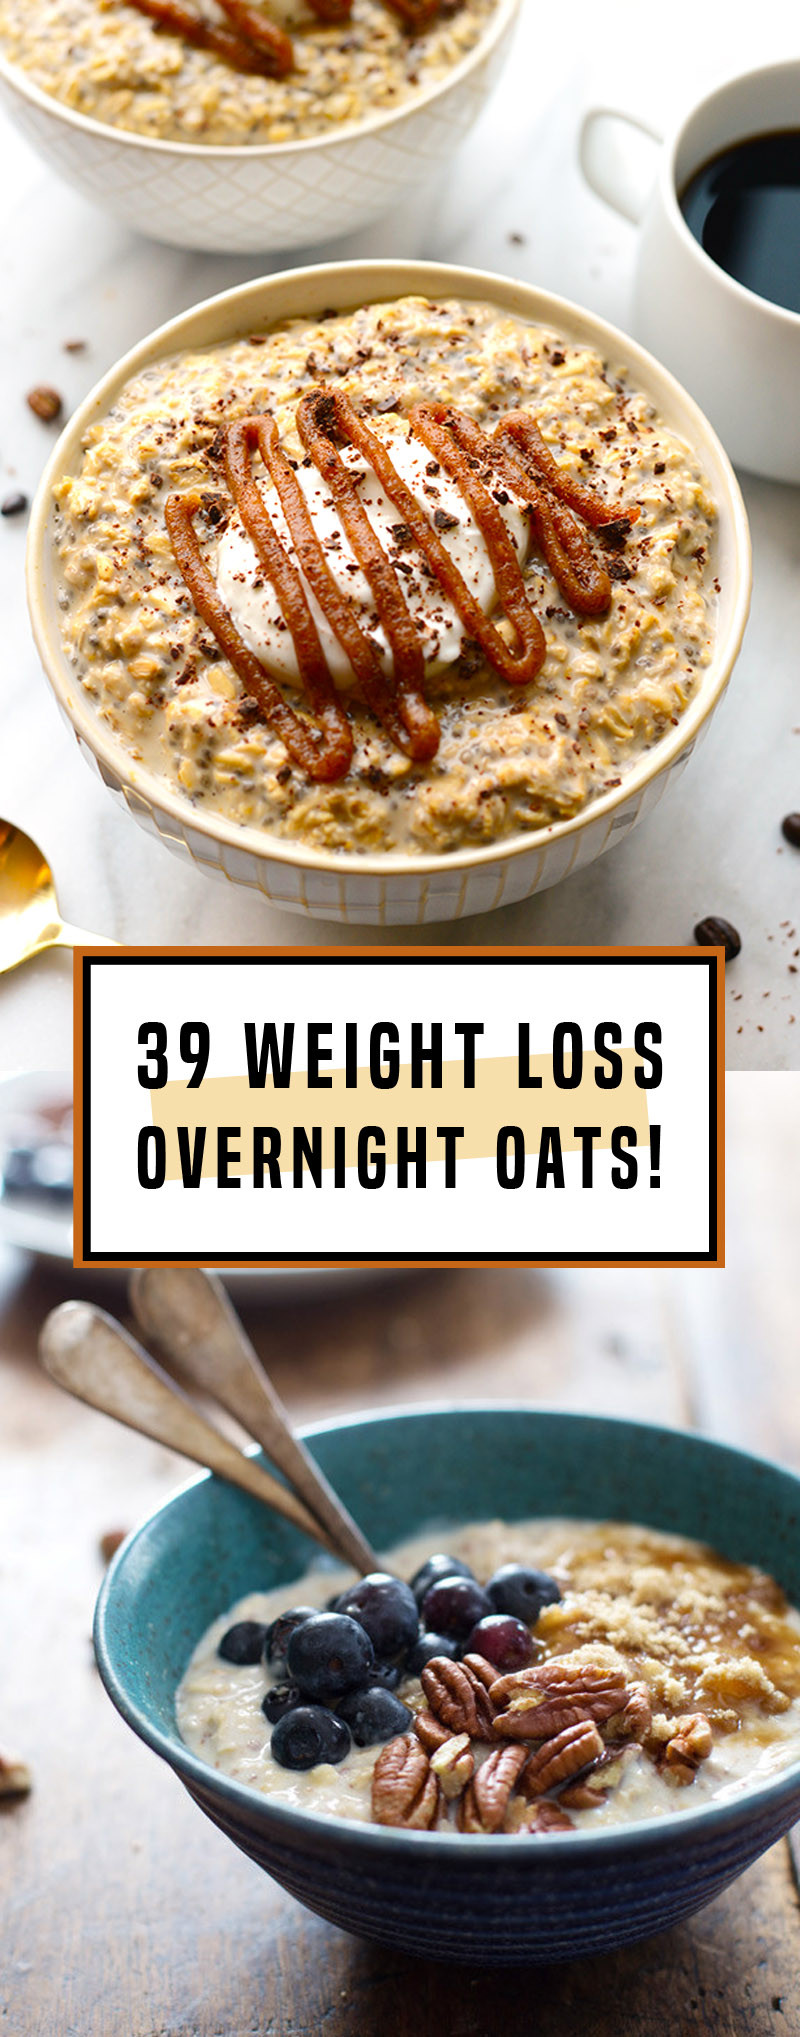 Top 22 Oats Recipe for Weight Loss - Best Recipes Ideas and Collections